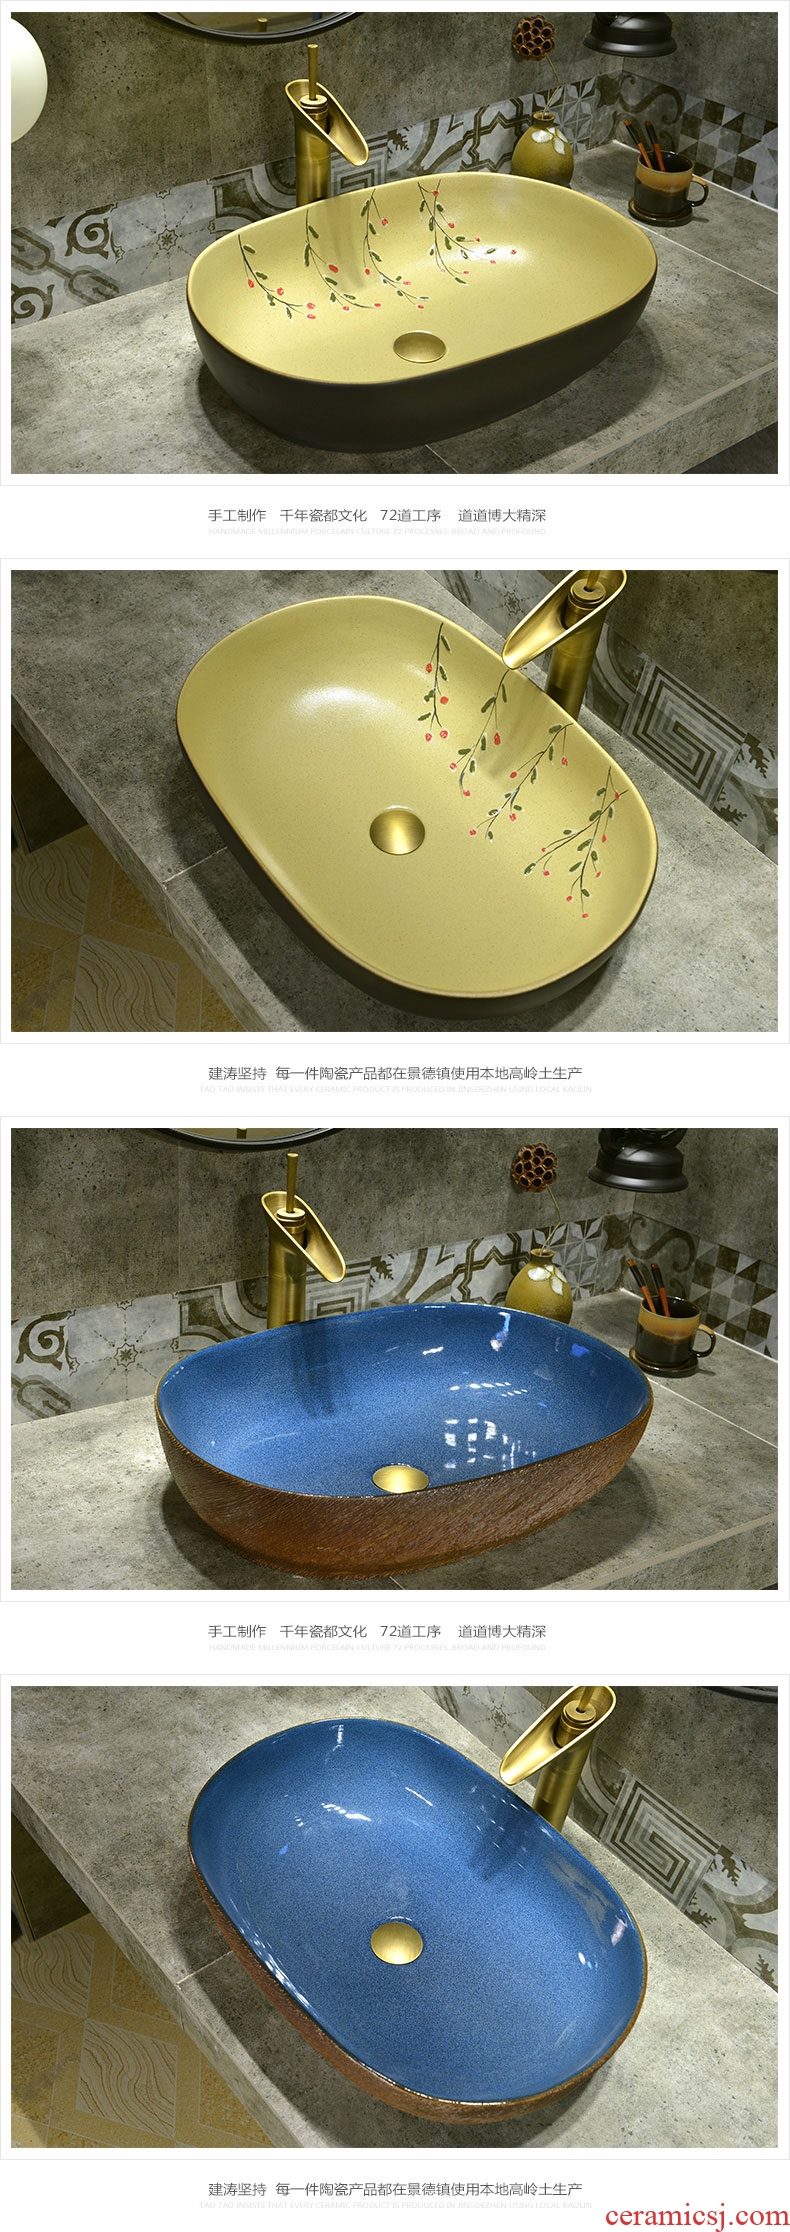 The sink on the ceramic basin to single household stage basin bathroom small size of the pool that wash a face to wash your hands wash basin